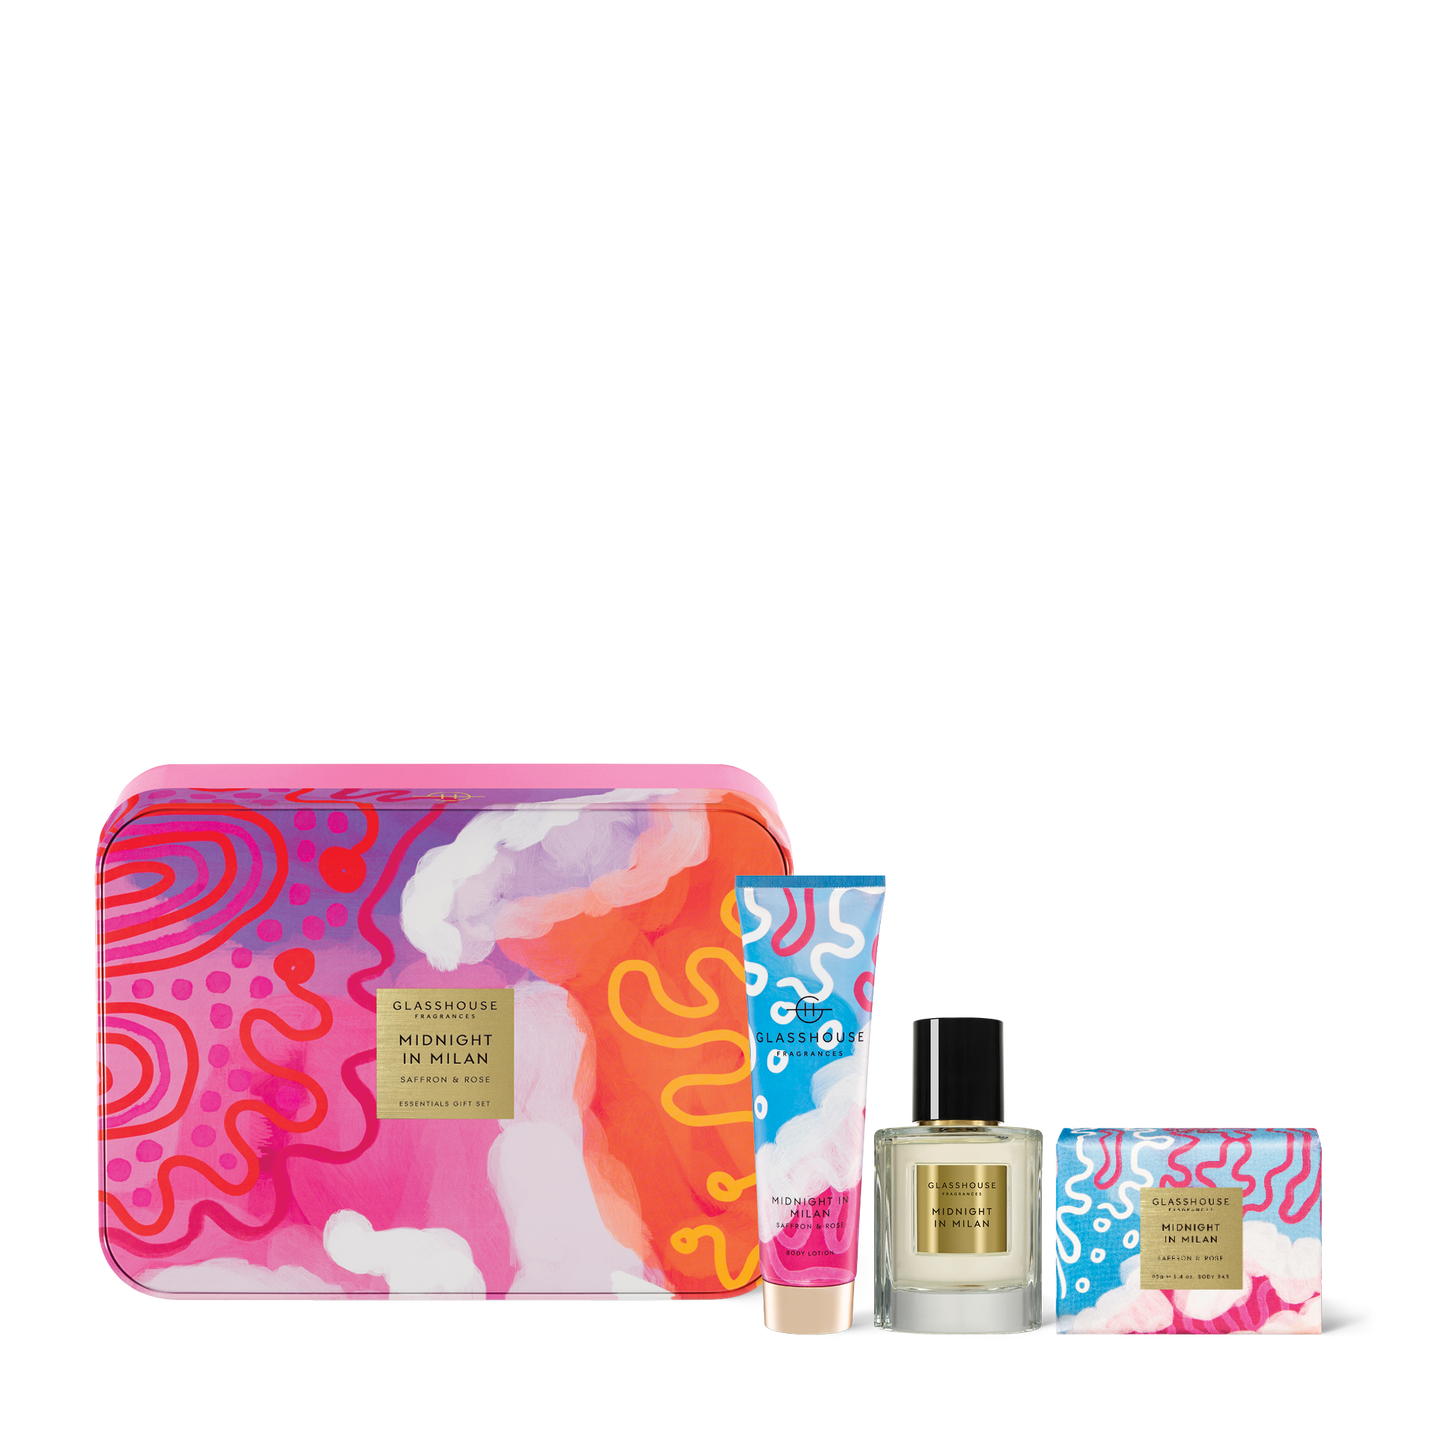 Glasshouse Mother's Day "Touch the Sky" Midnight in Milan Essentials Gift Set